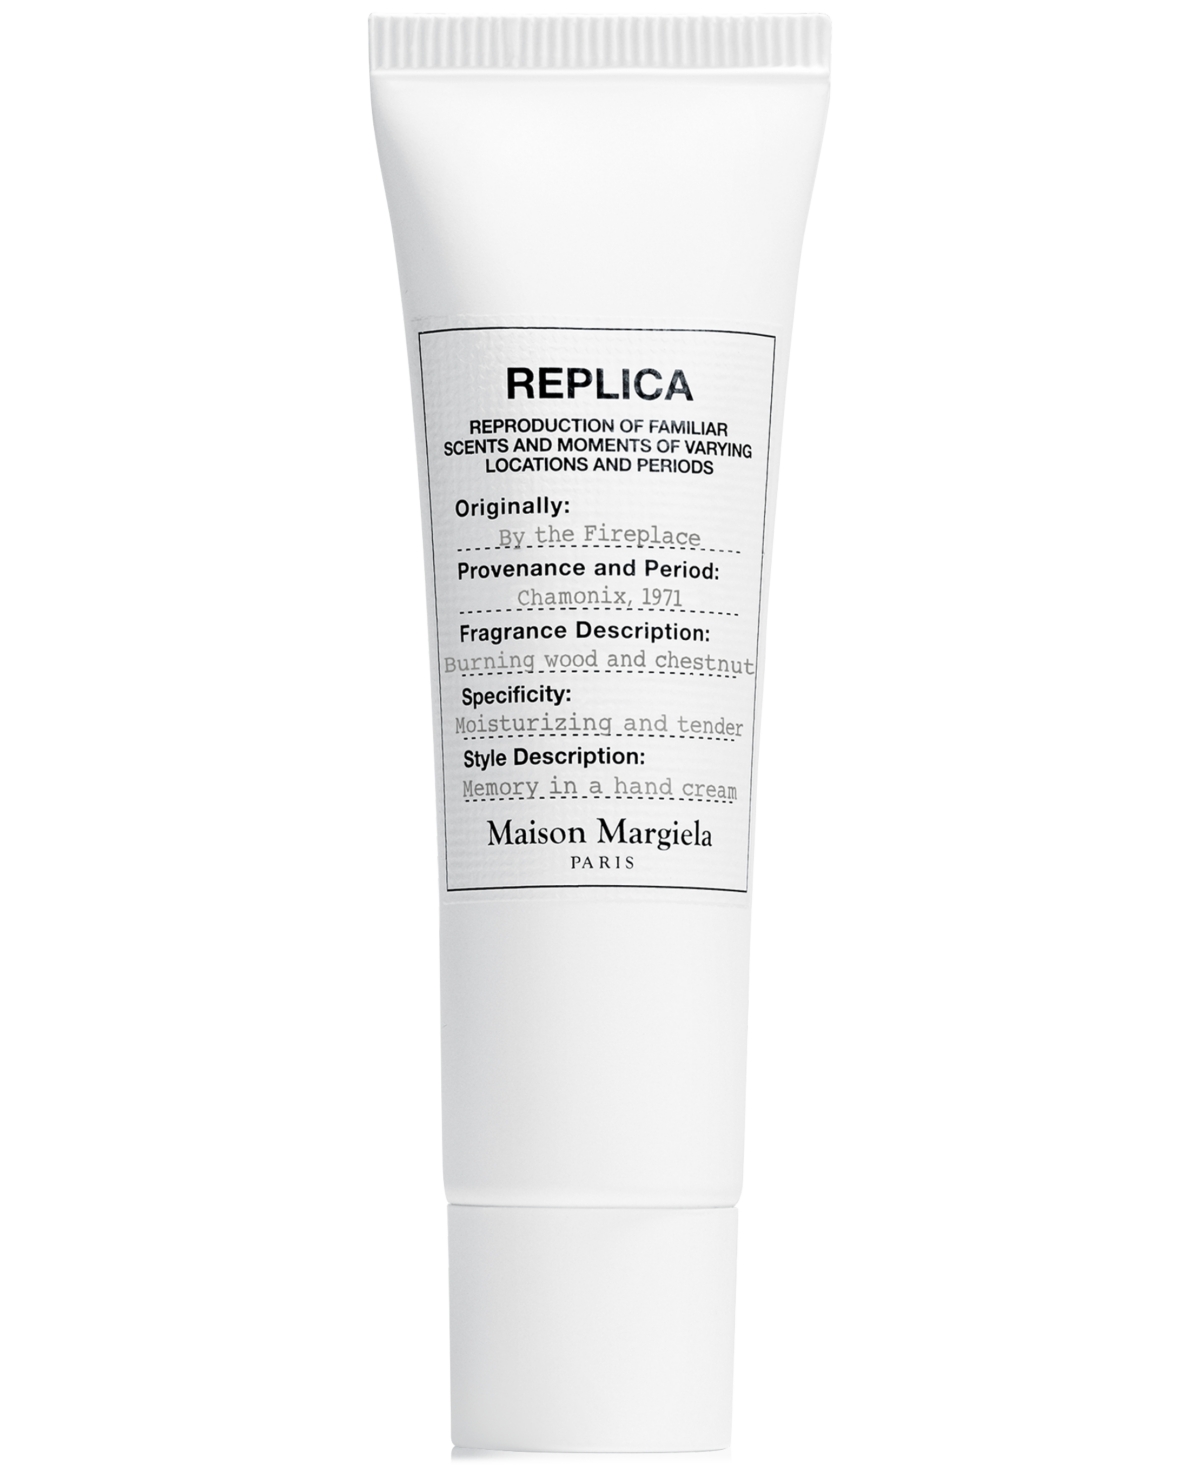 Replica By The Fireplace Scented Hand Cream, 1.01 oz.